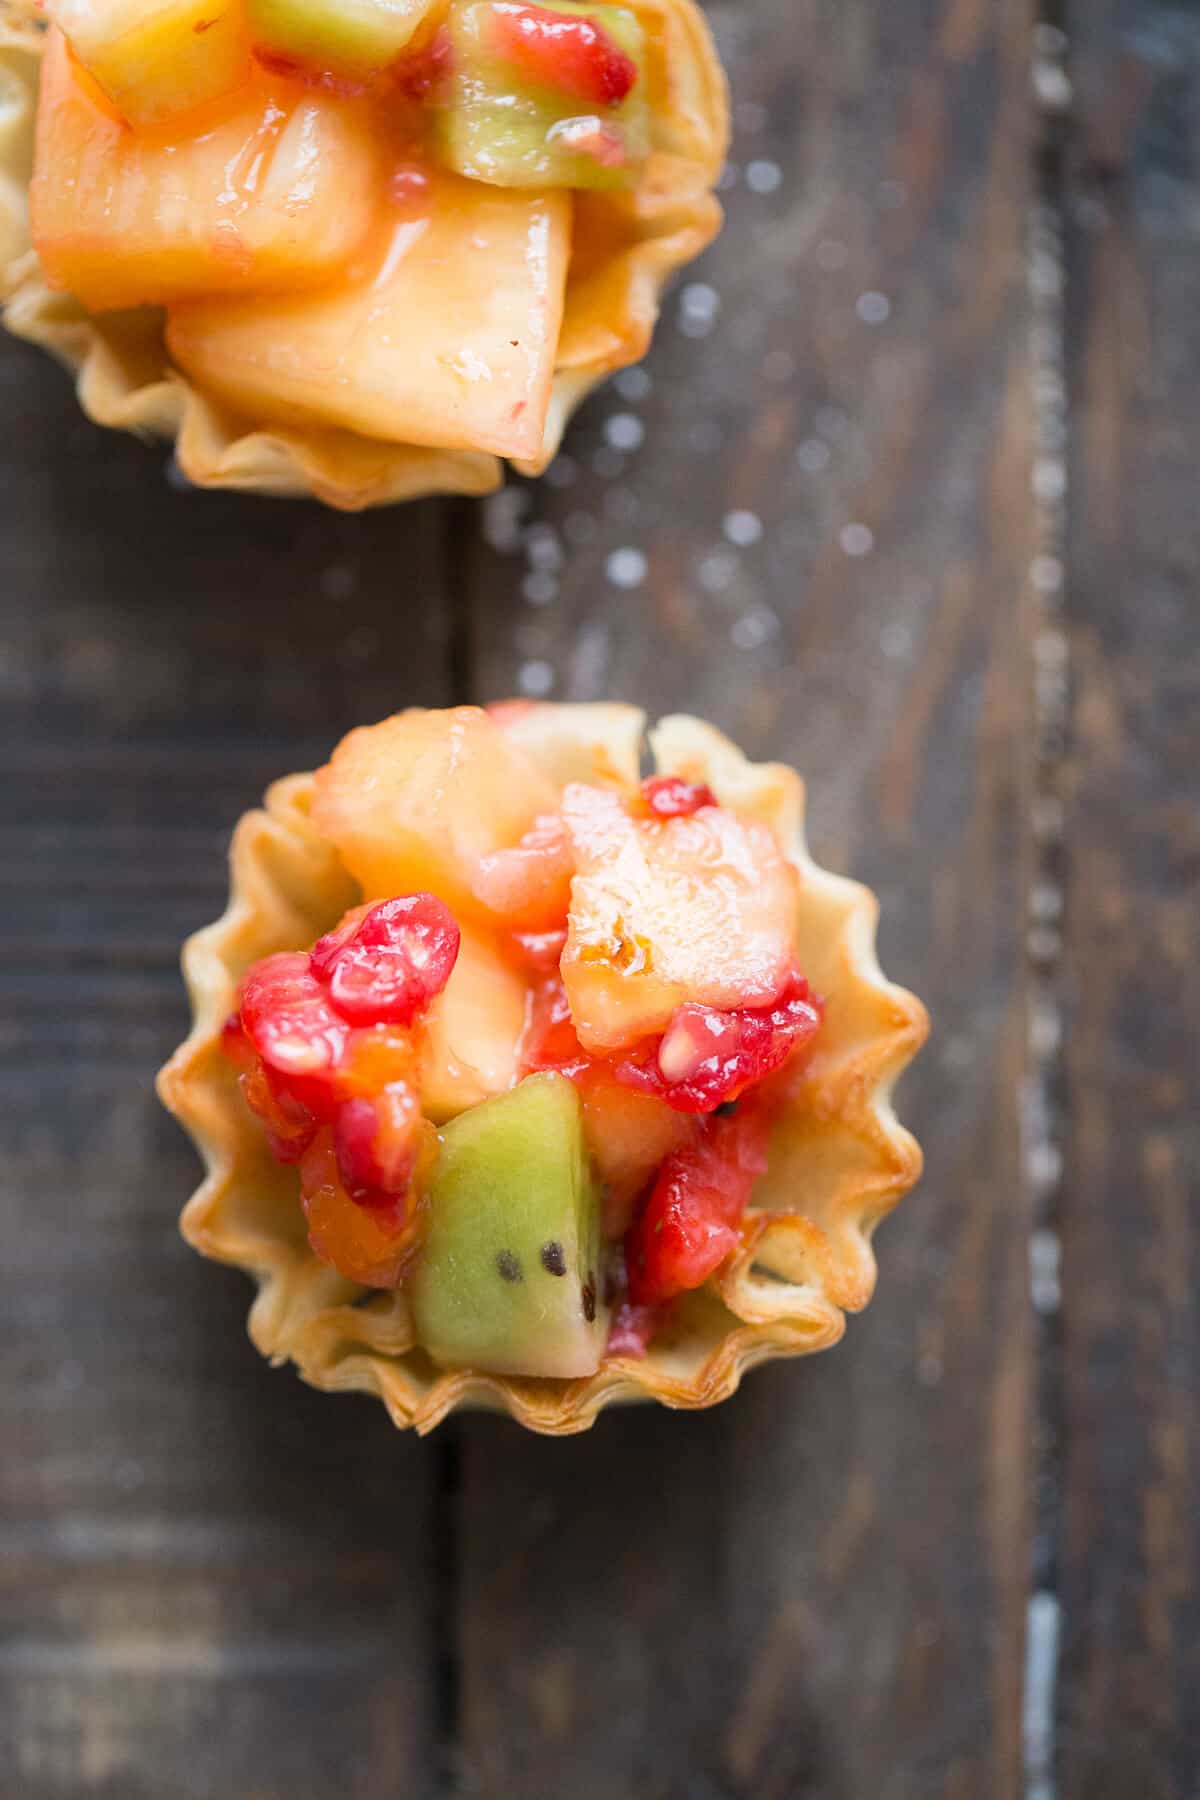 Fruit salsa is a hit at any party. These little shells are coated in cinnamon sugar and filled with a tropical fruit combination that is amazing!